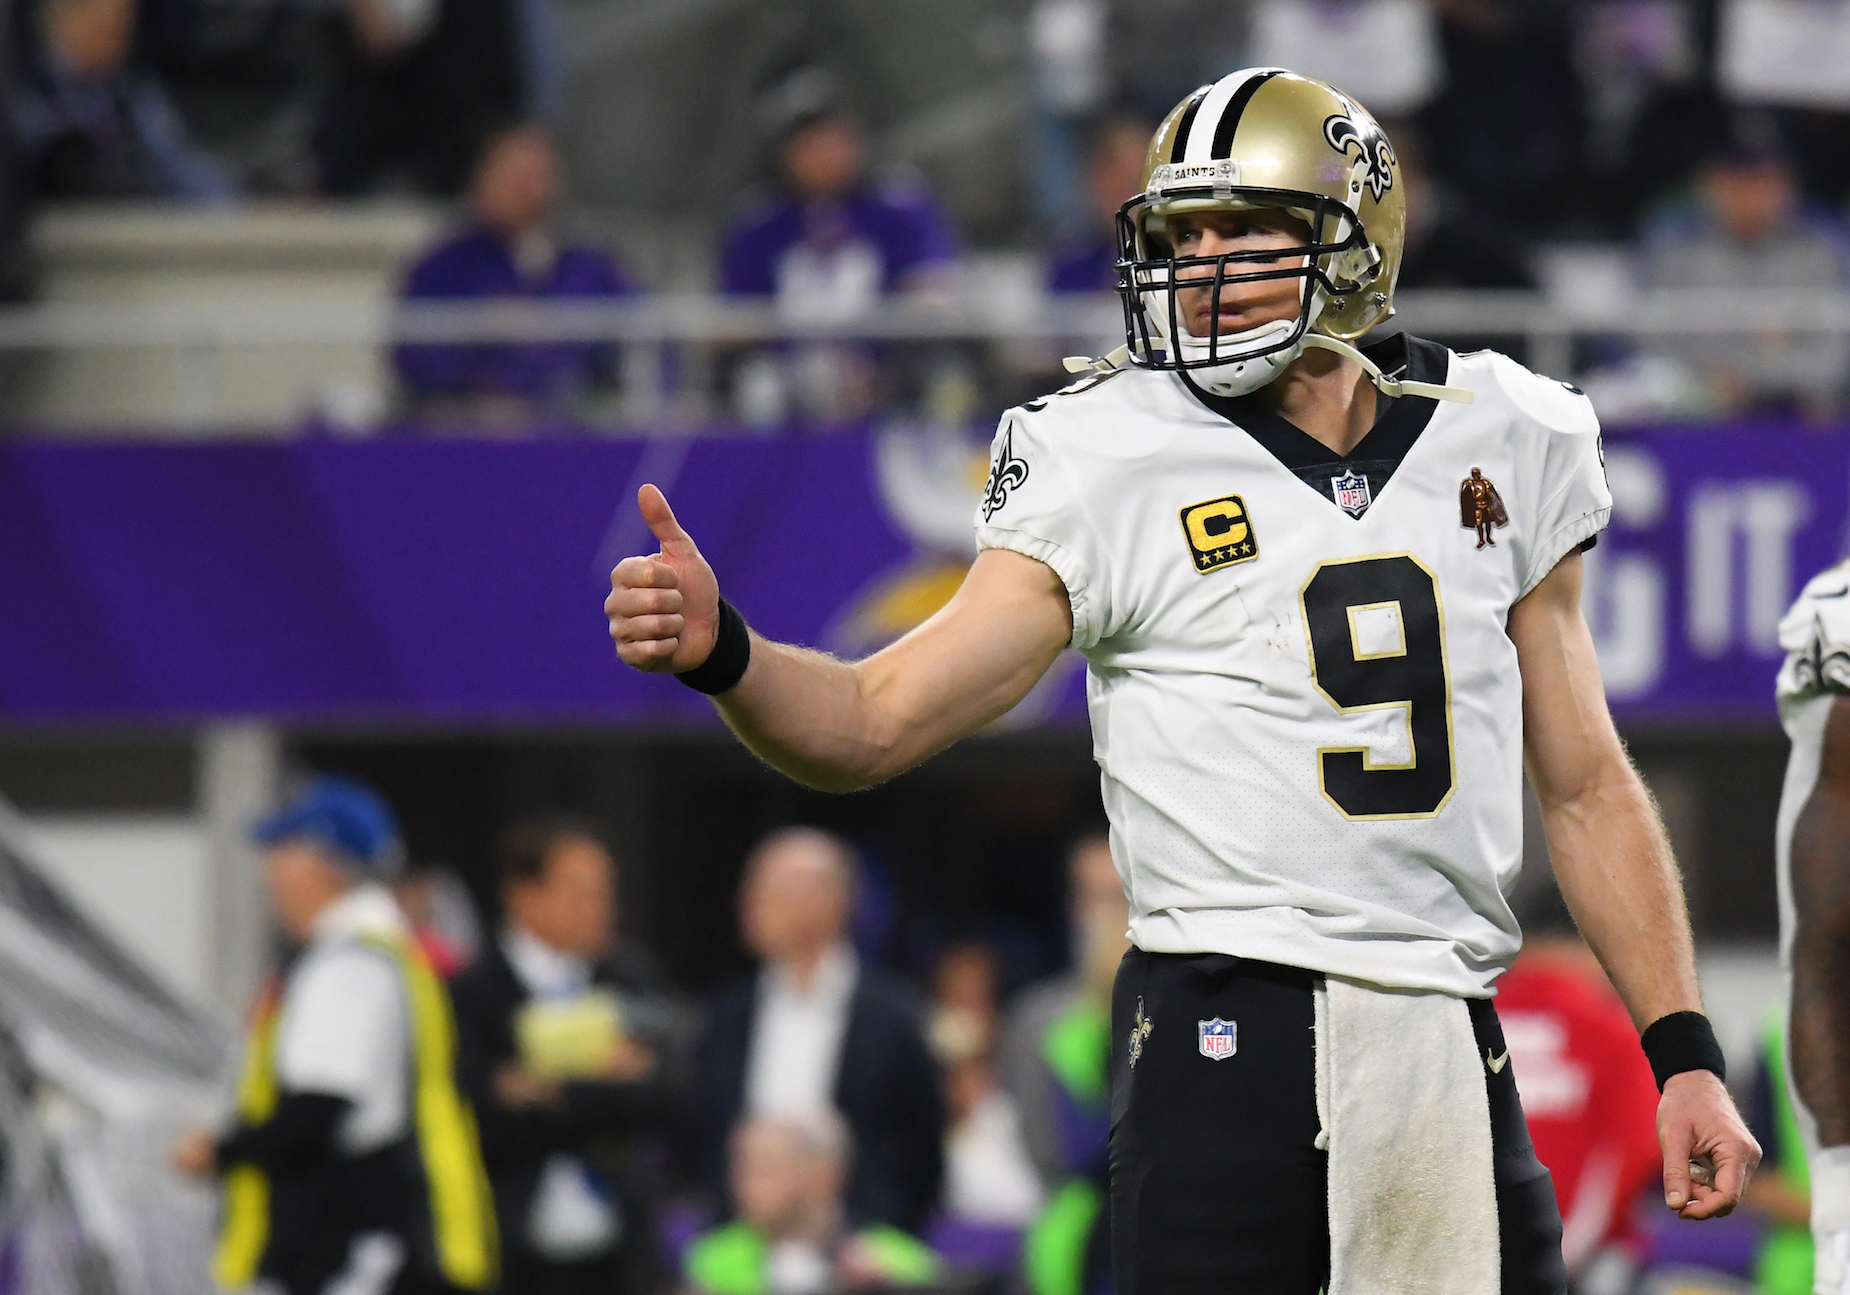 While Drew Brees will miss some time with his latest injury, the New Orleans Saints quarterback believes he'l be back in no time.